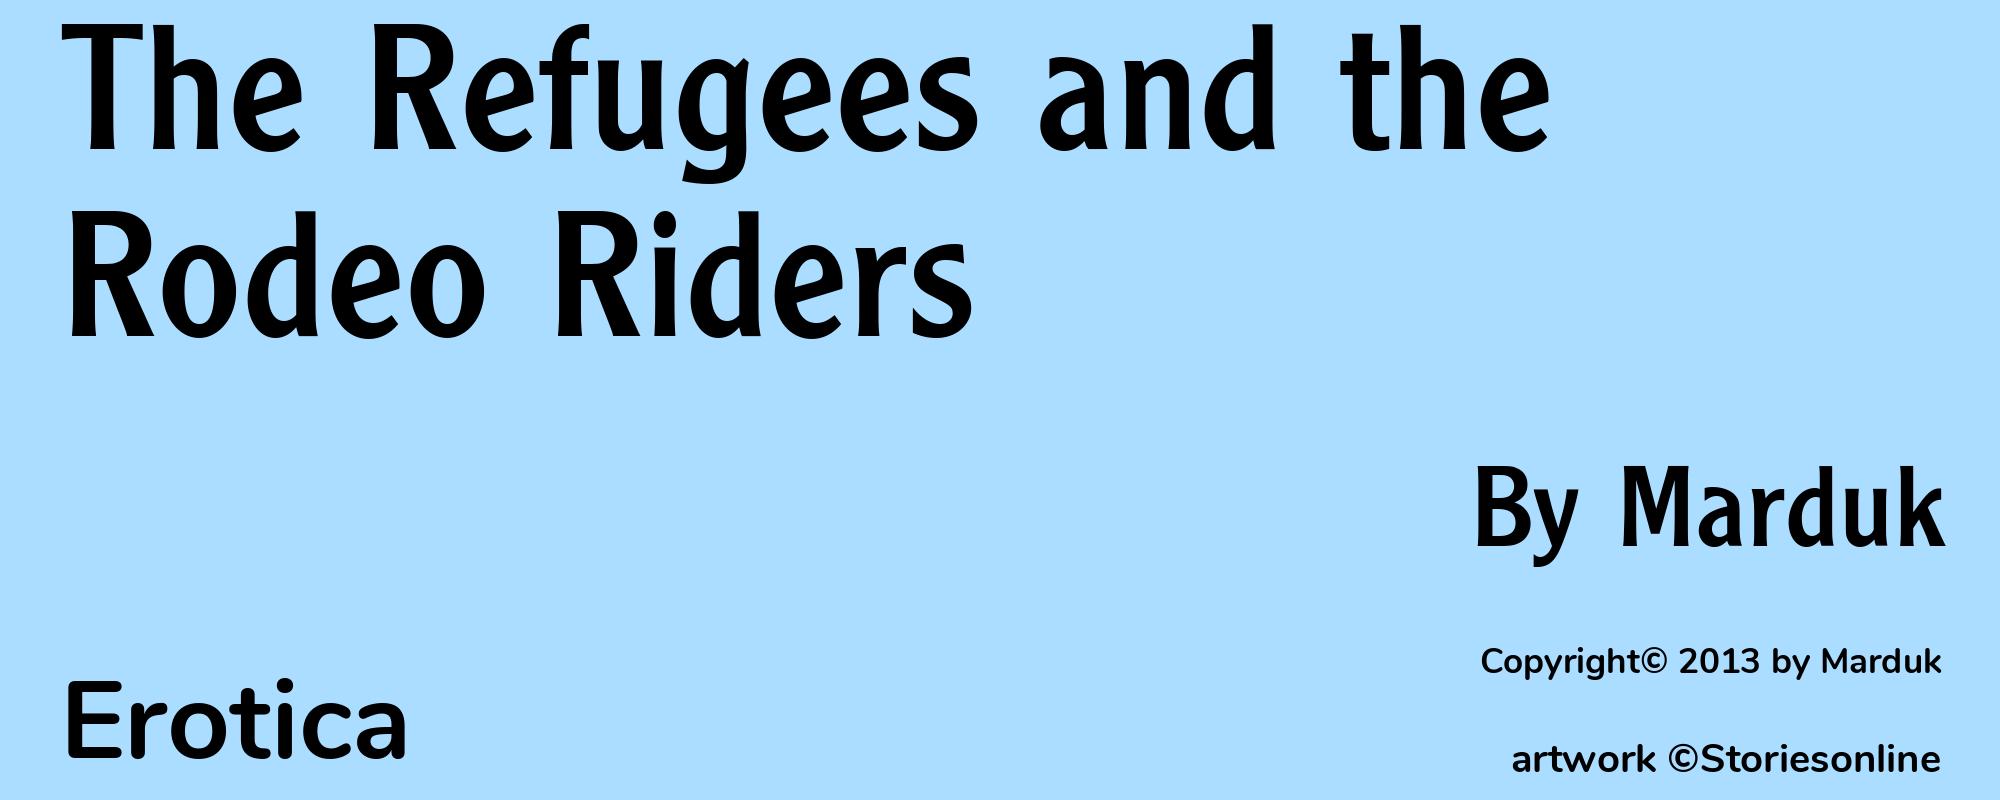 The Refugees and the Rodeo Riders - Cover